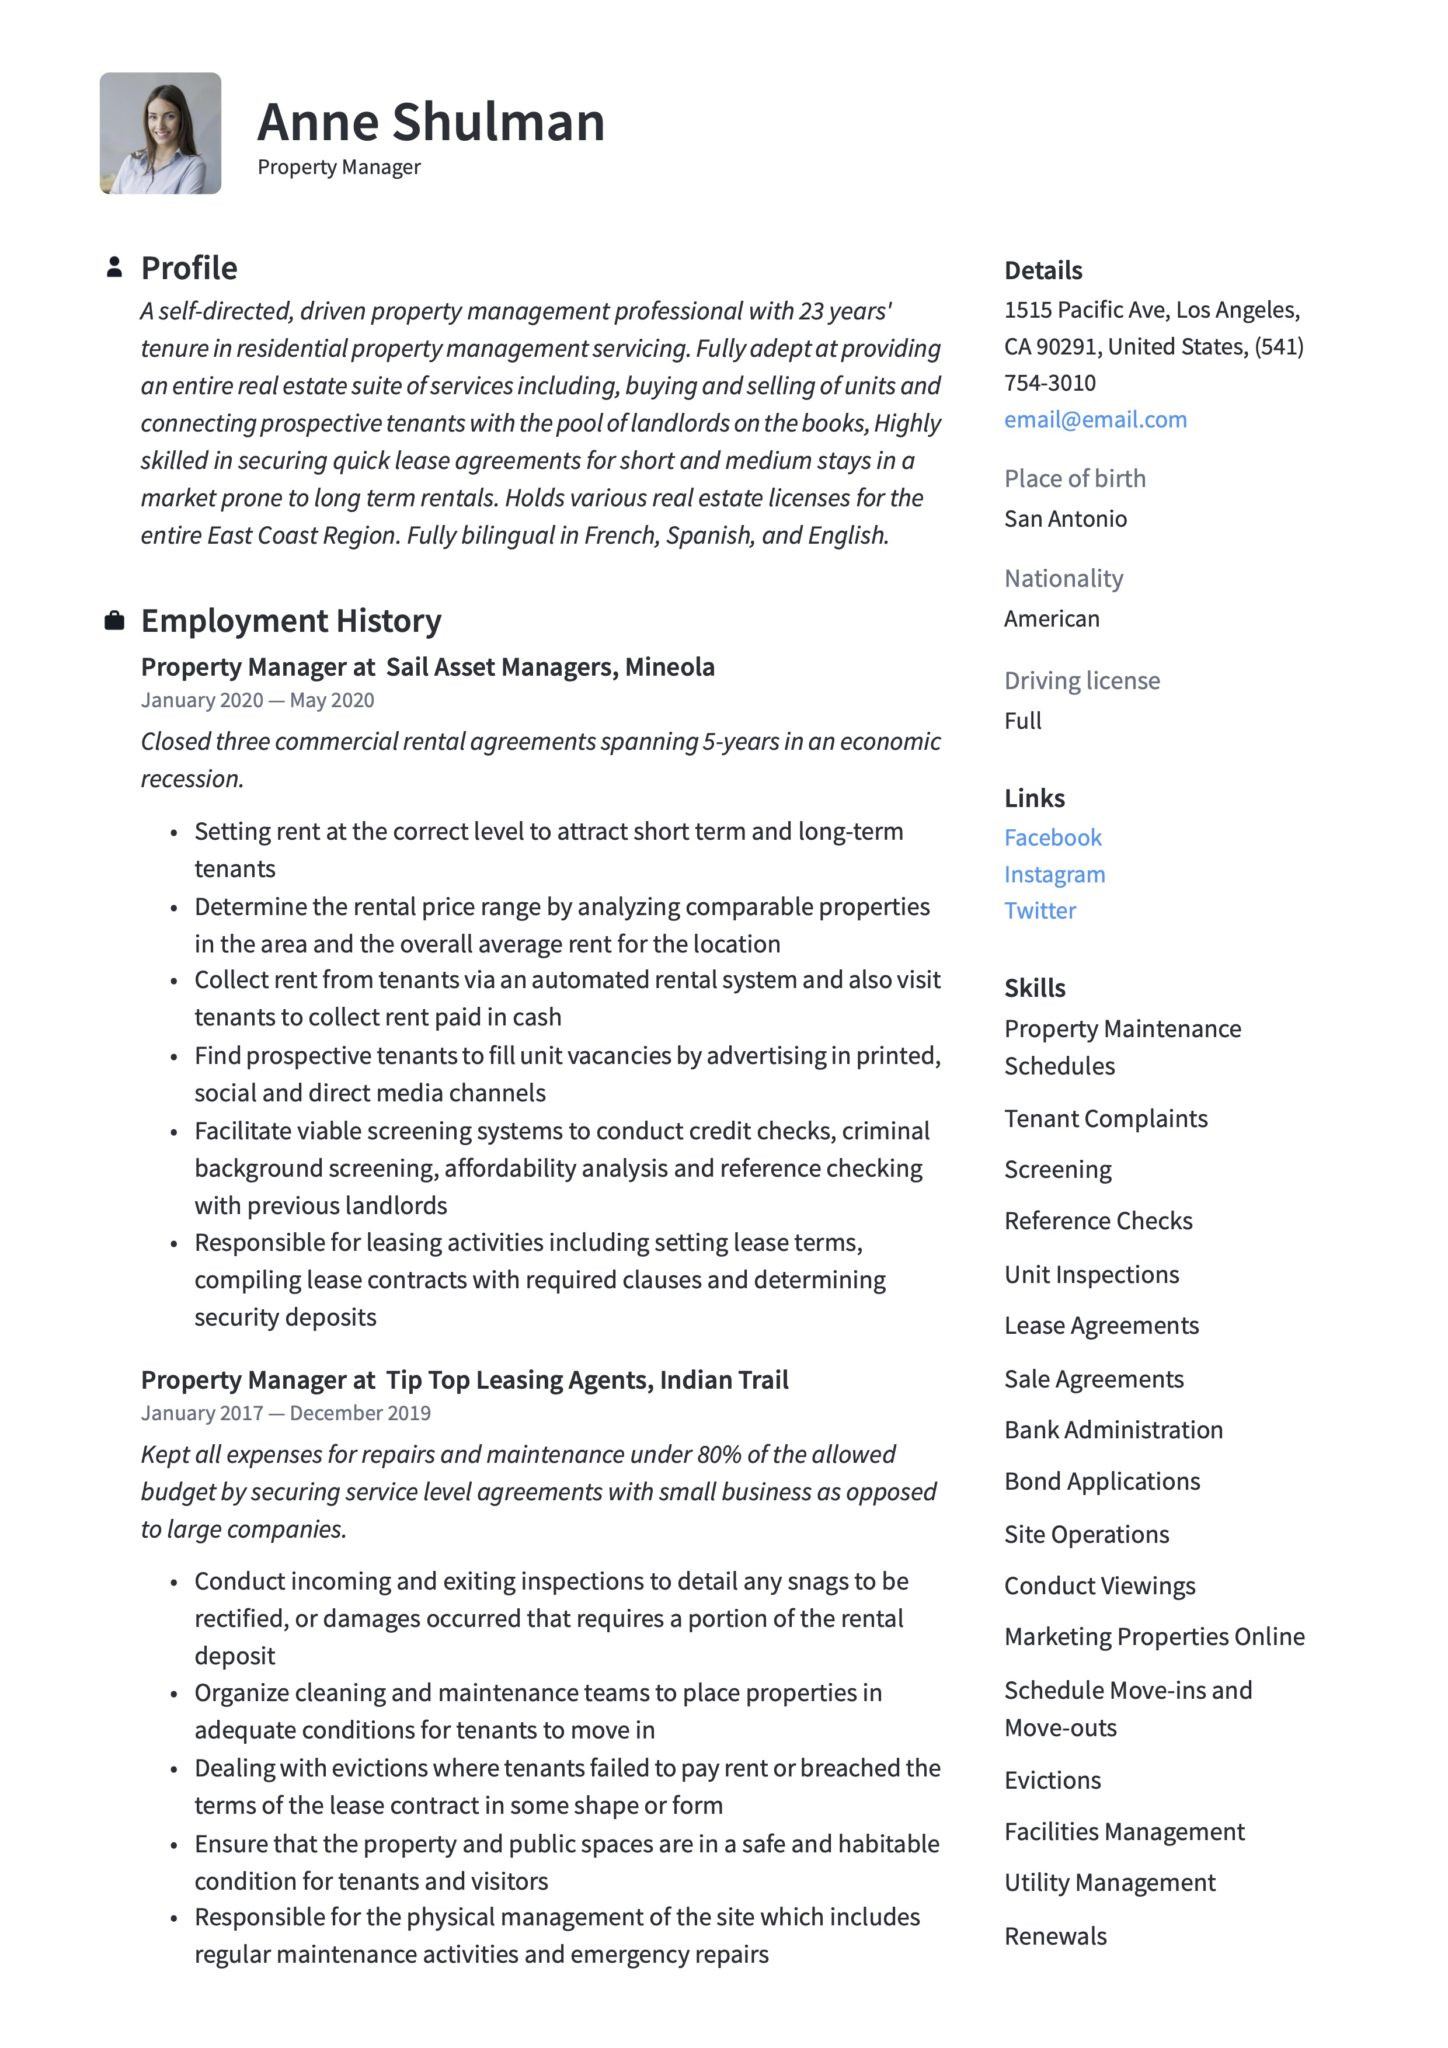 Sample Resume for Property Management Job Property Manager Resume & Writing Guide  18 Templates 2020